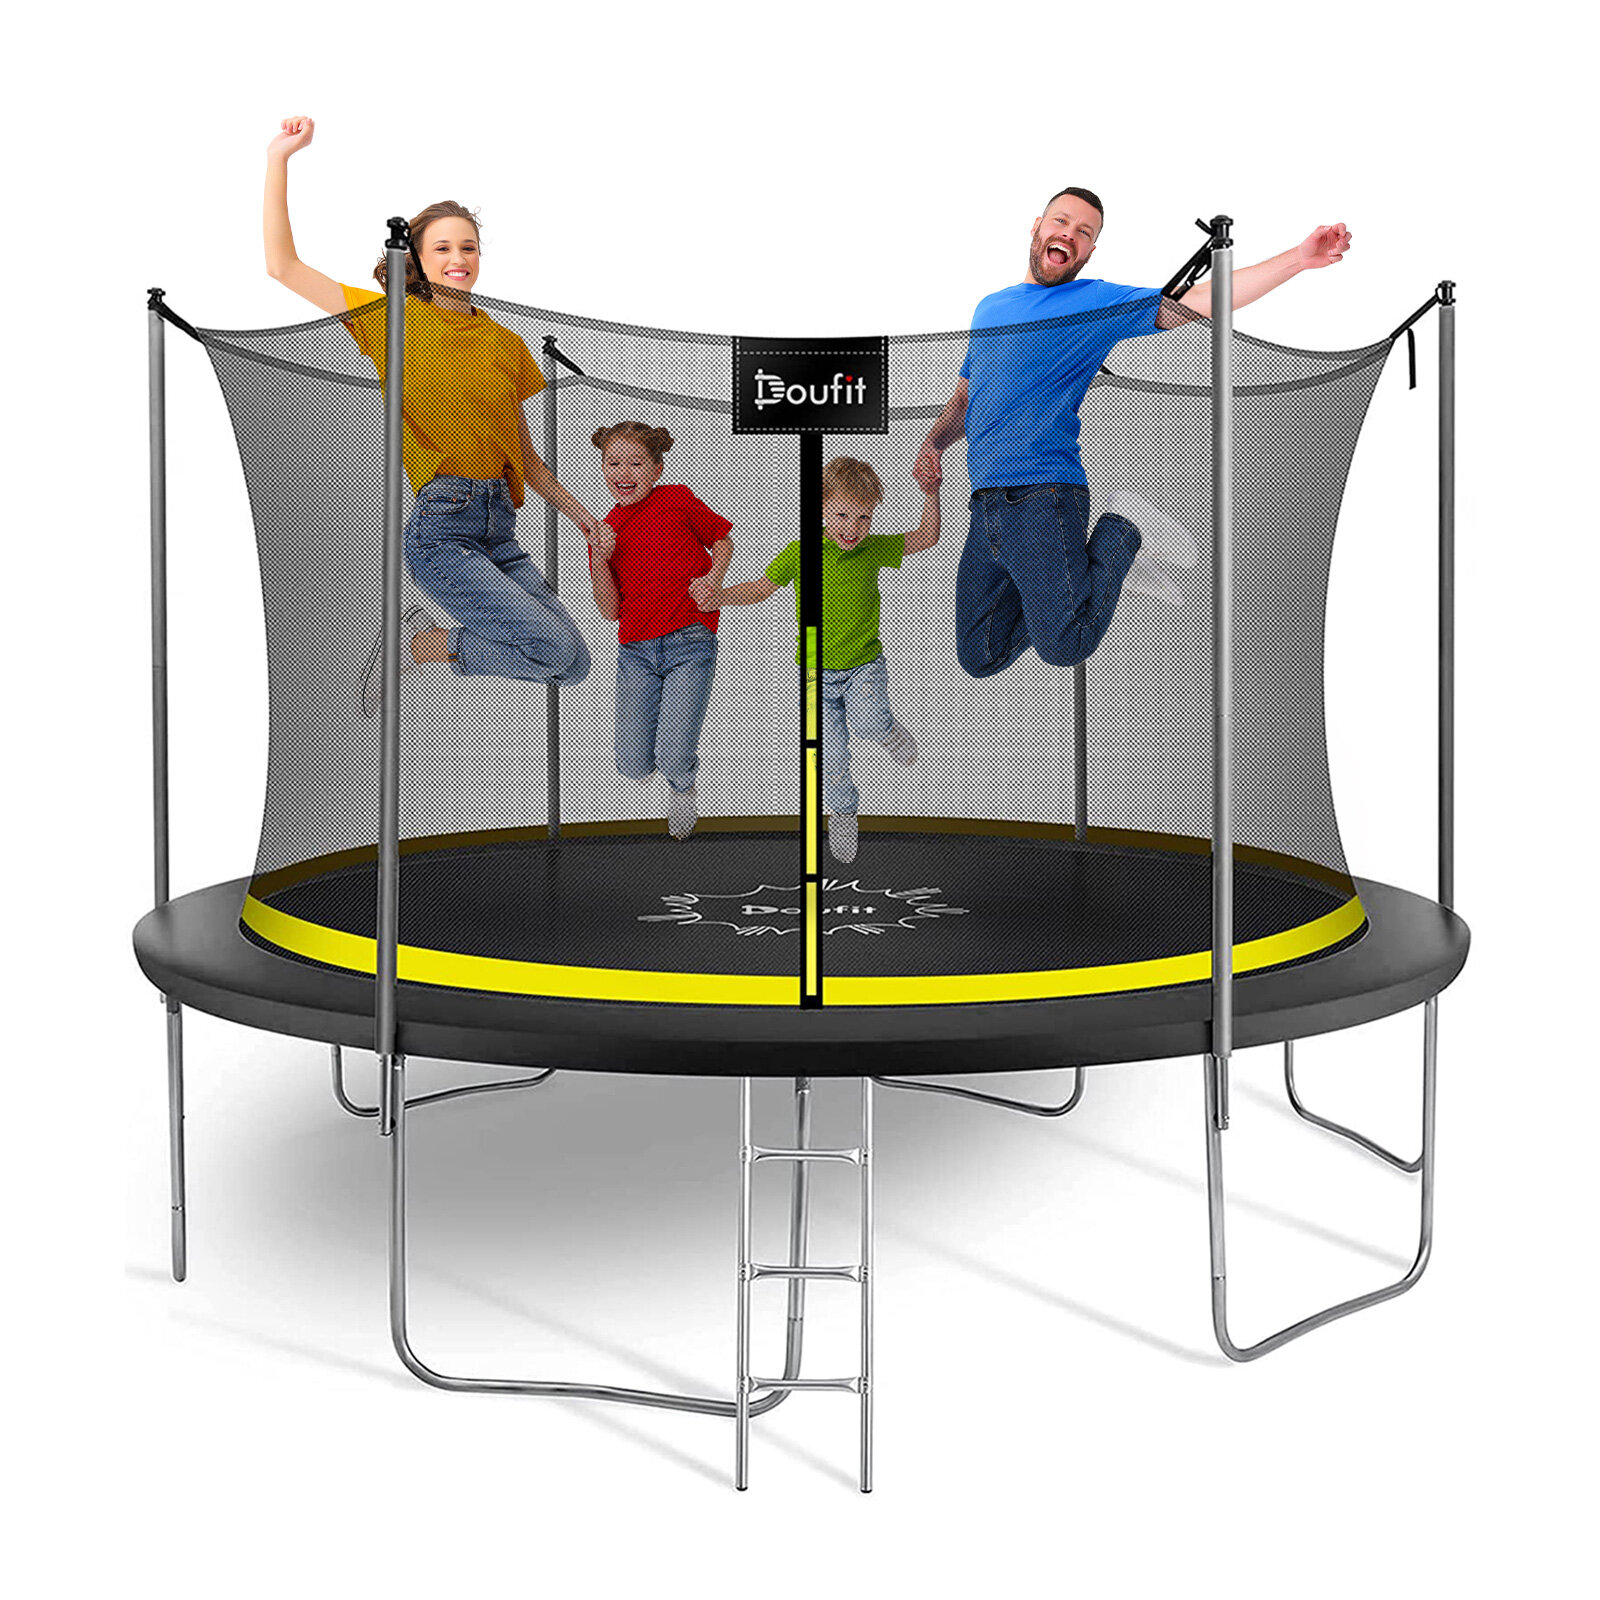 Image of Doufit 12FT Trampoline Jumping Exercise Fitness Heavy Duty Re-bounder Bed with Enclosure Net Ladder Outdoor Home Sport